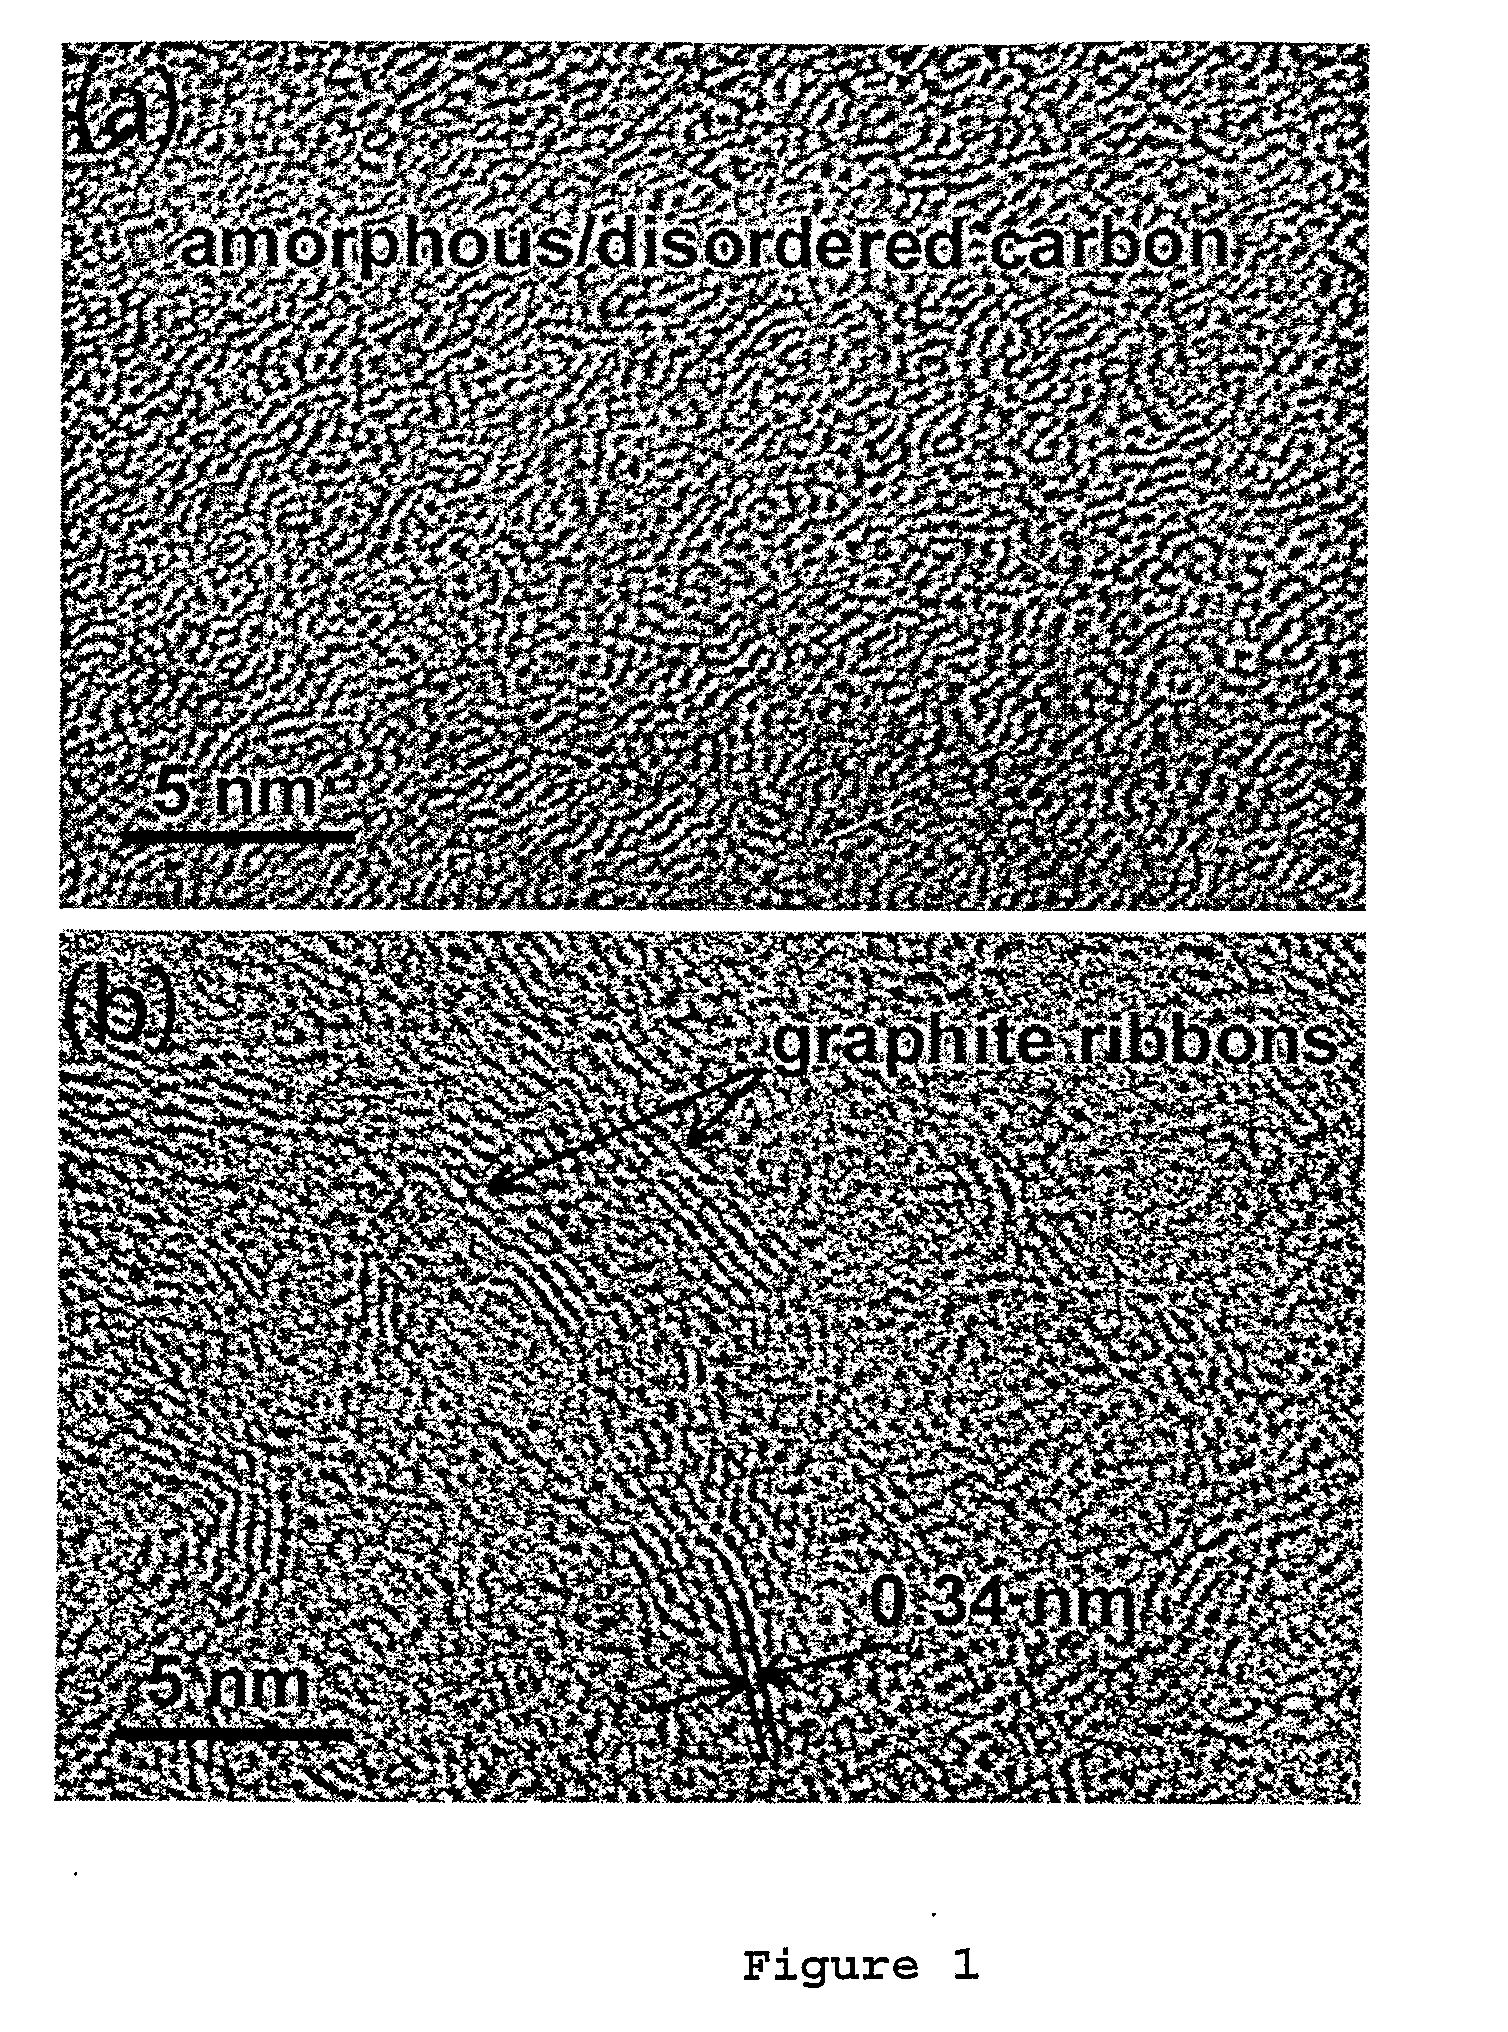 Nanocellular high surface area material and methods for use and production thereof